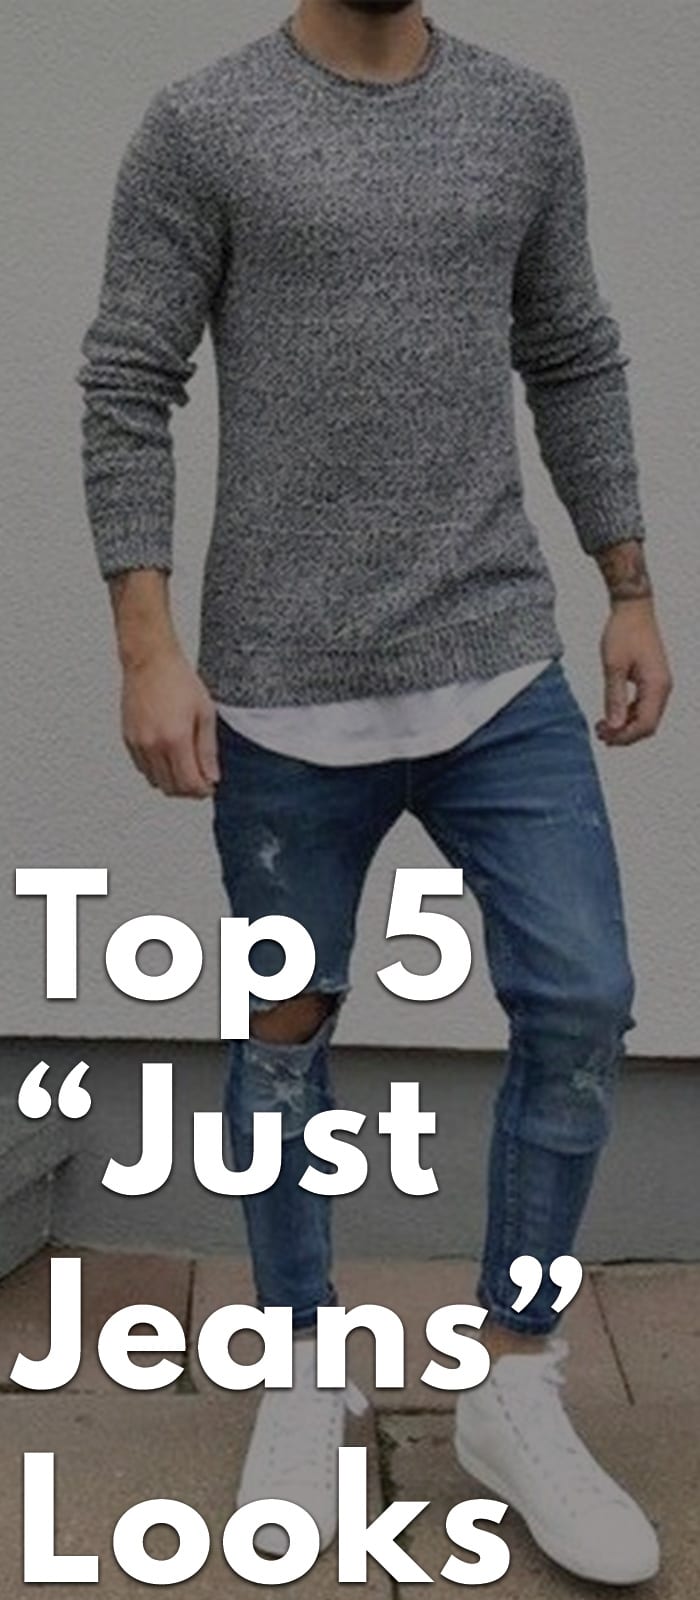 Top-5-“Just-Jeans”-Looks